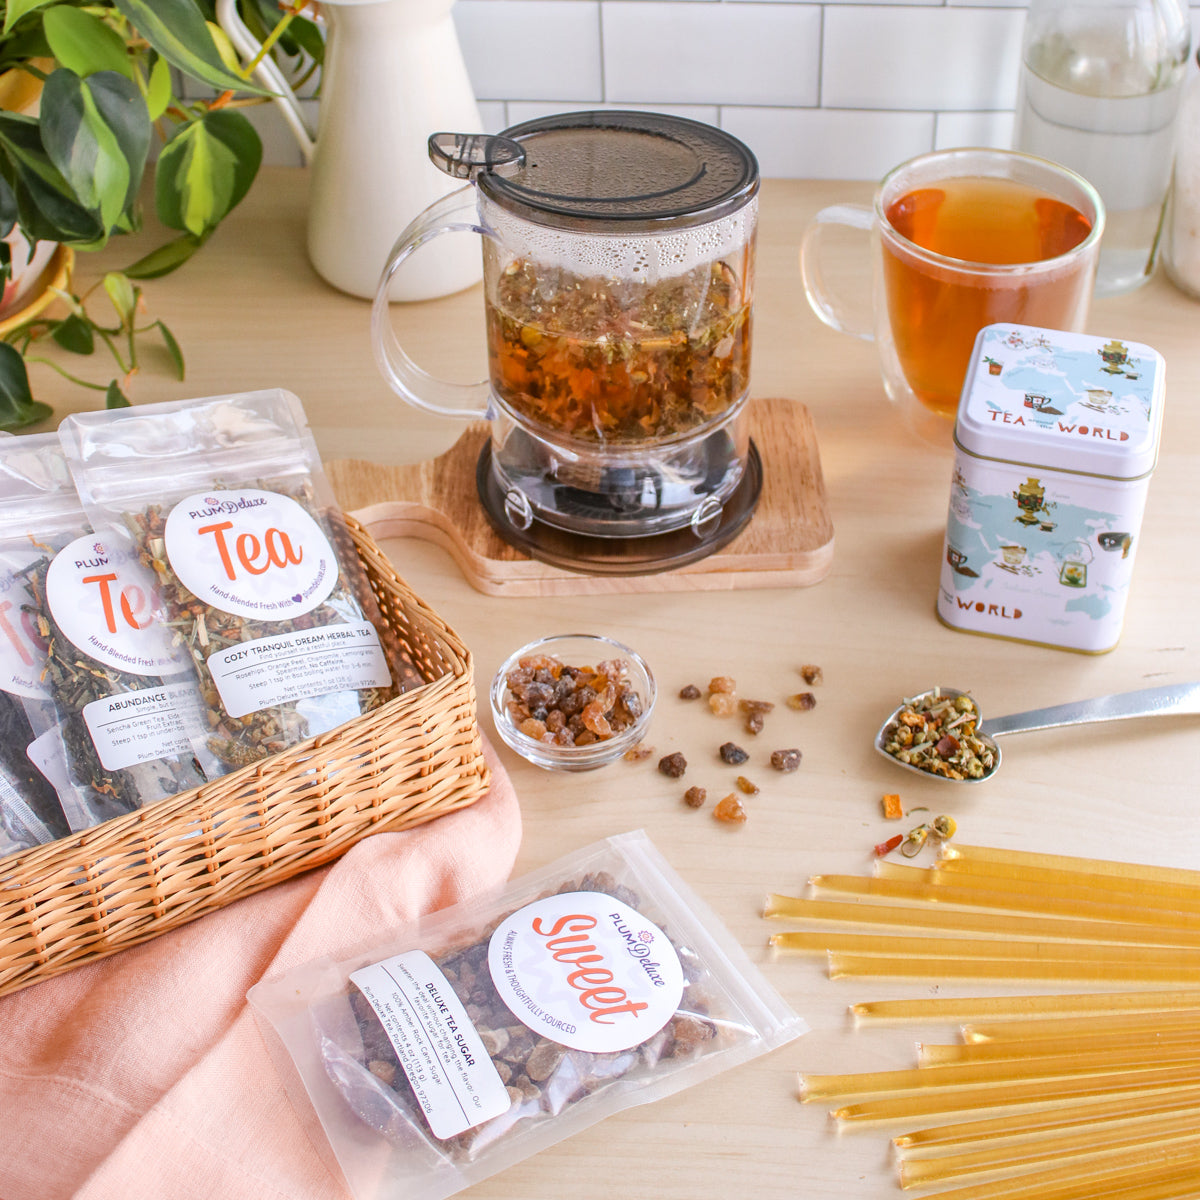 How Do You Use a Tea Infuser? – Plum Deluxe Tea